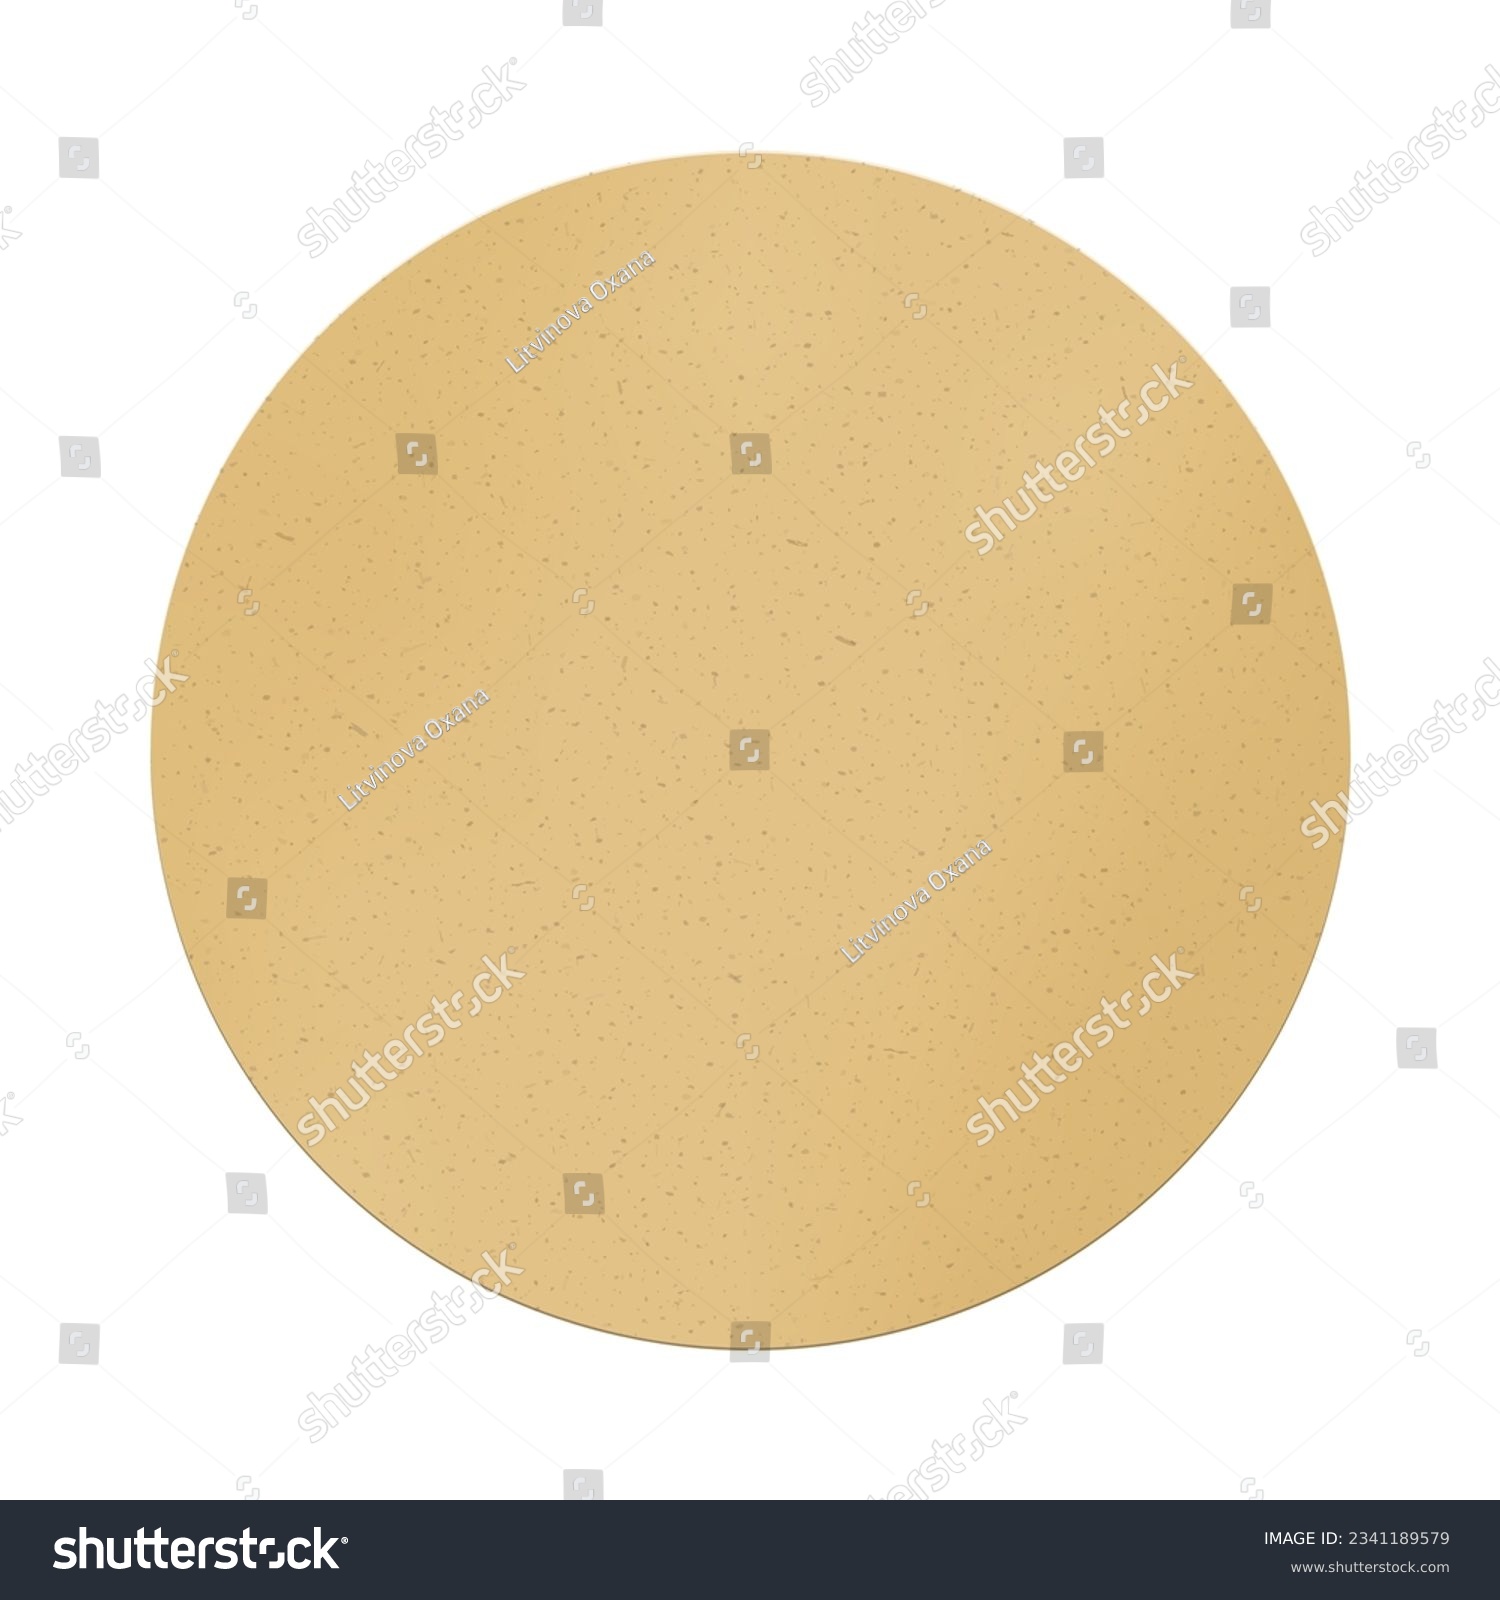 SVG of Brown cardboard beer stand mockup. Empty beer sample isolated from background. Carton circle for branding and applying a logo under a hot cup or a wet glass. svg